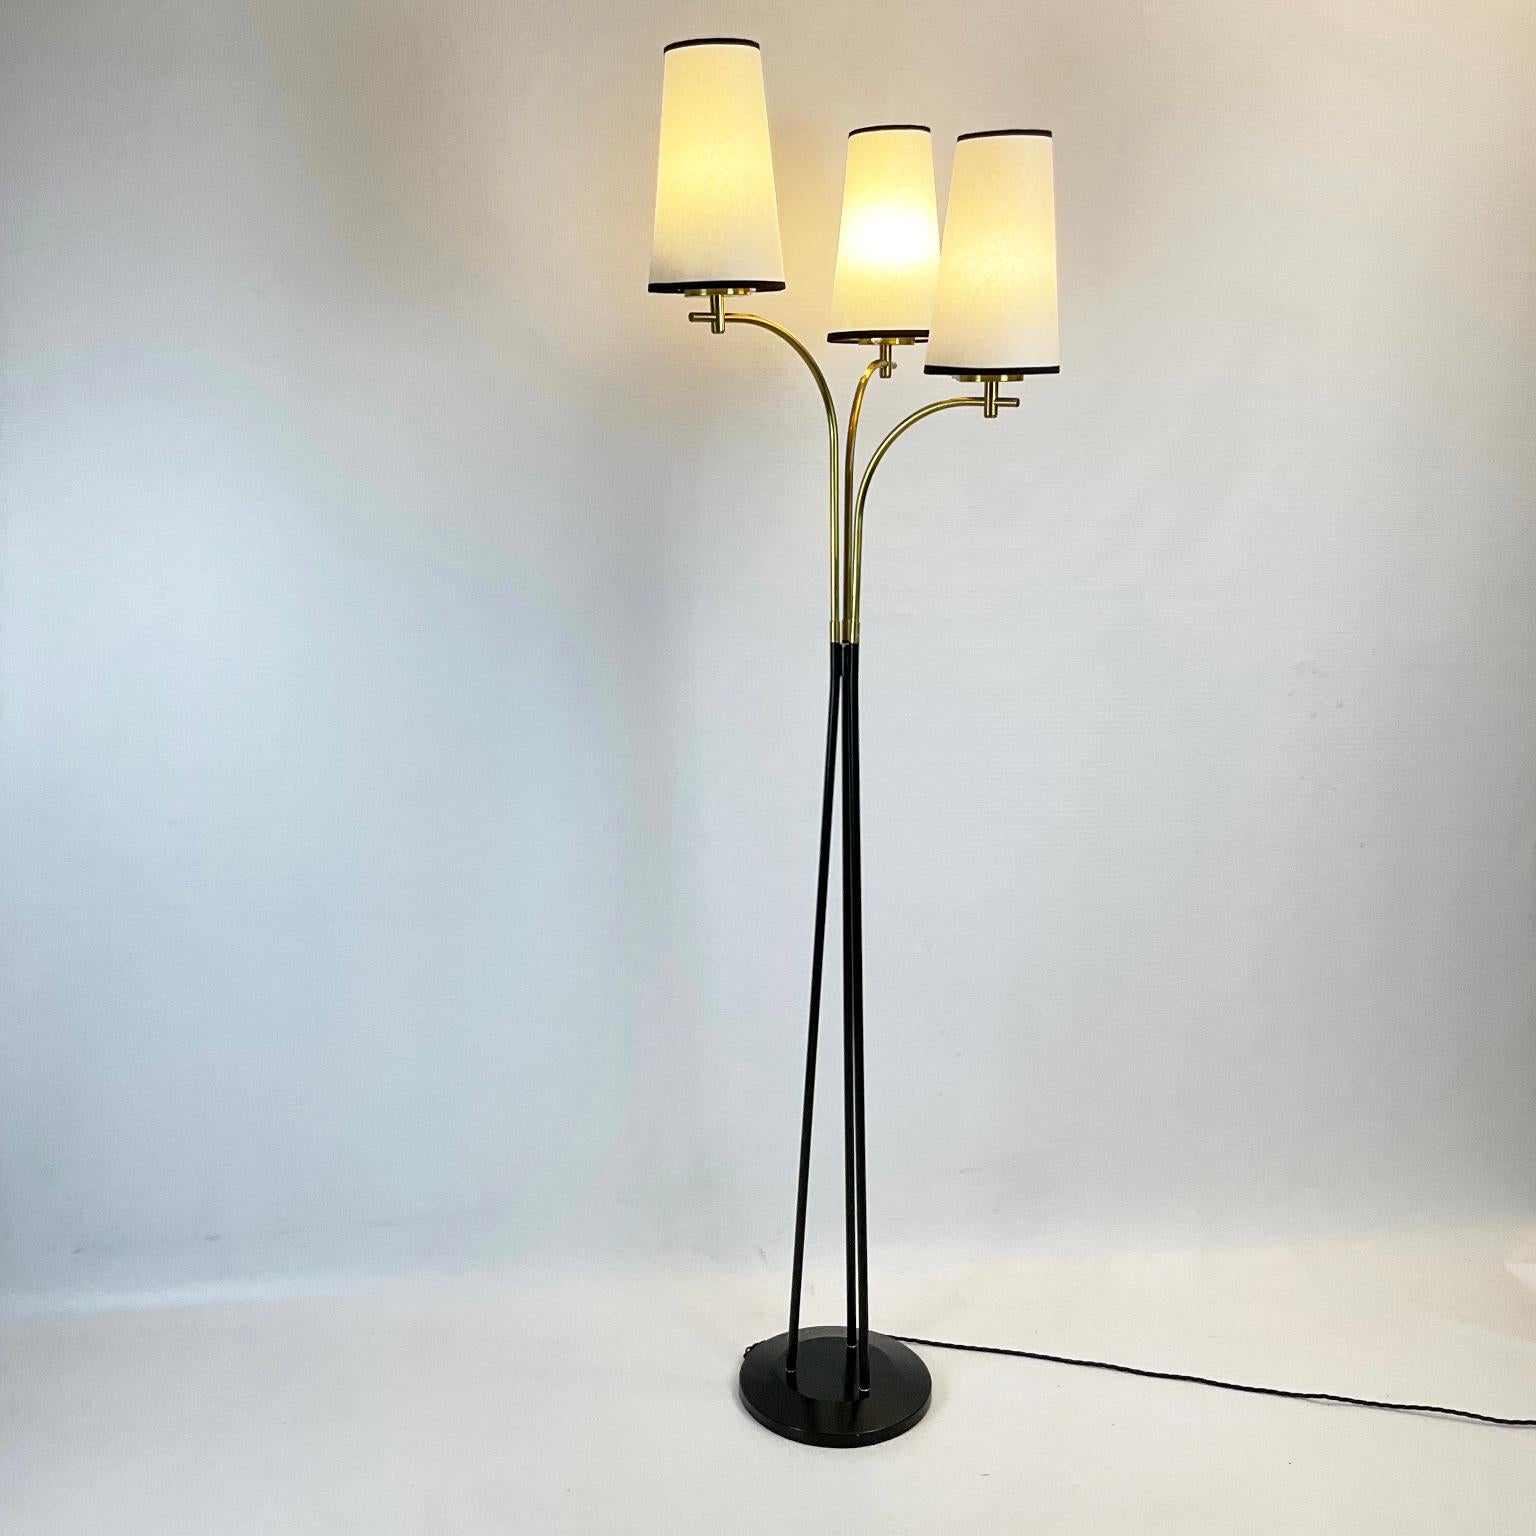 Mid-Century Modern 1950s Floor Lamp Attributed to Maison Lunel France For Sale